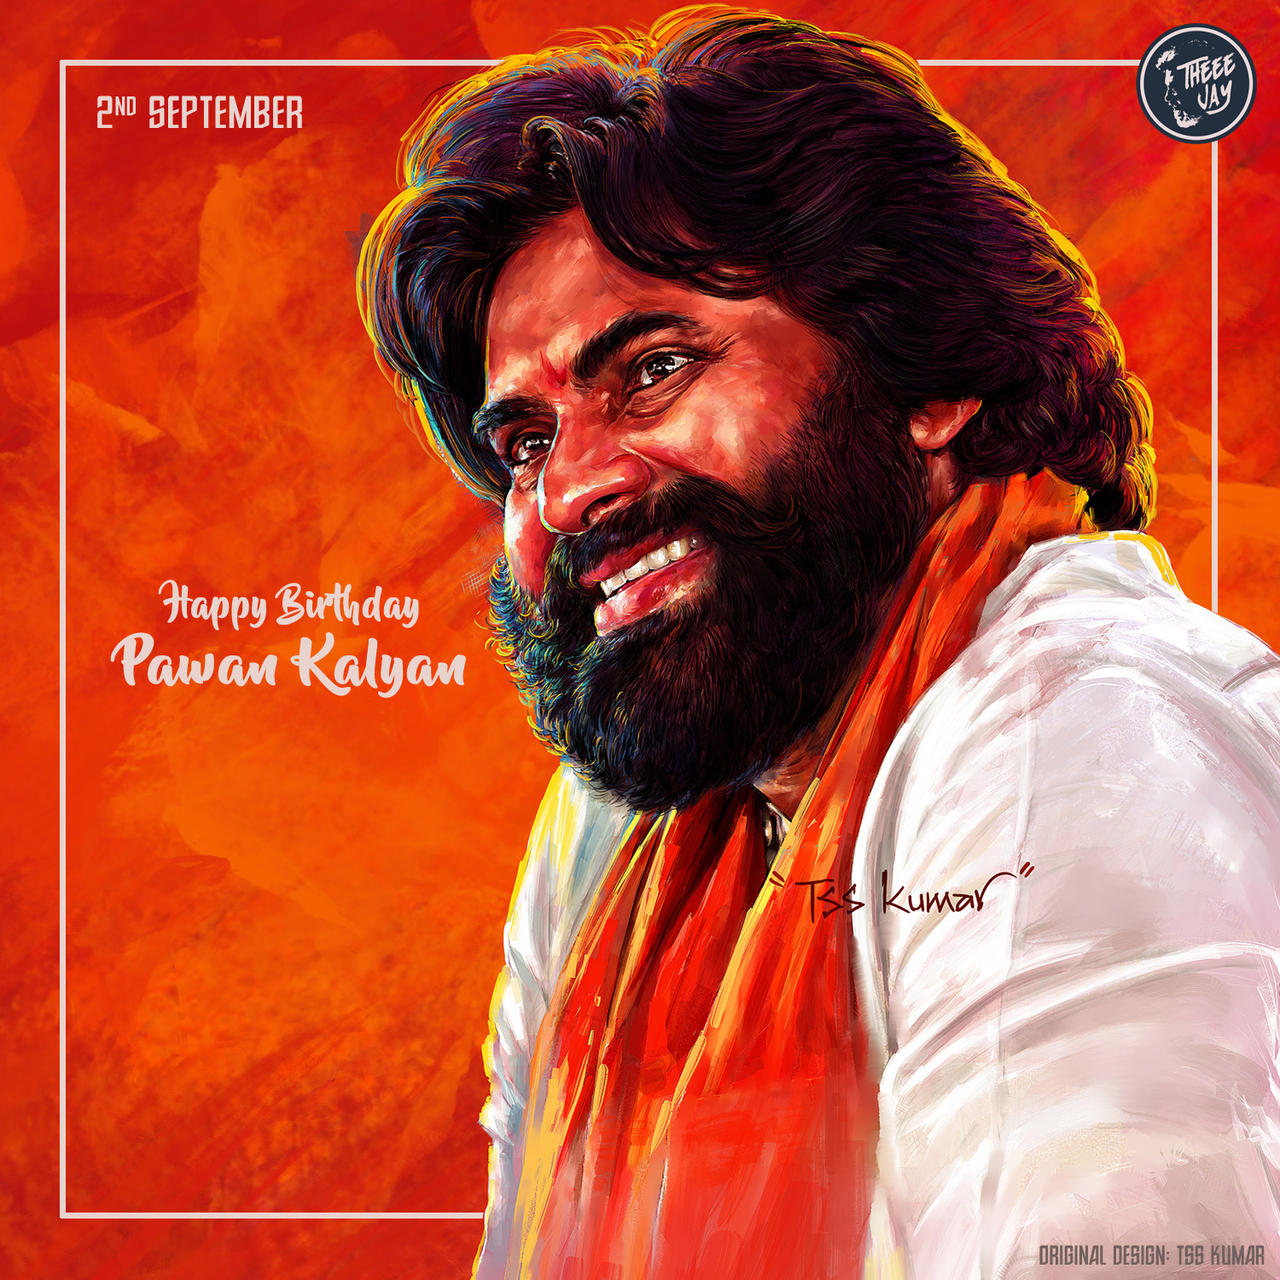 Happy Birthday Pawan Kalyan: Greet Telugu Superstar Using These Best Wishes, Images, Messages, Quotes, Greetings, Banners, Posters, and WhatsApp Status Video To Download